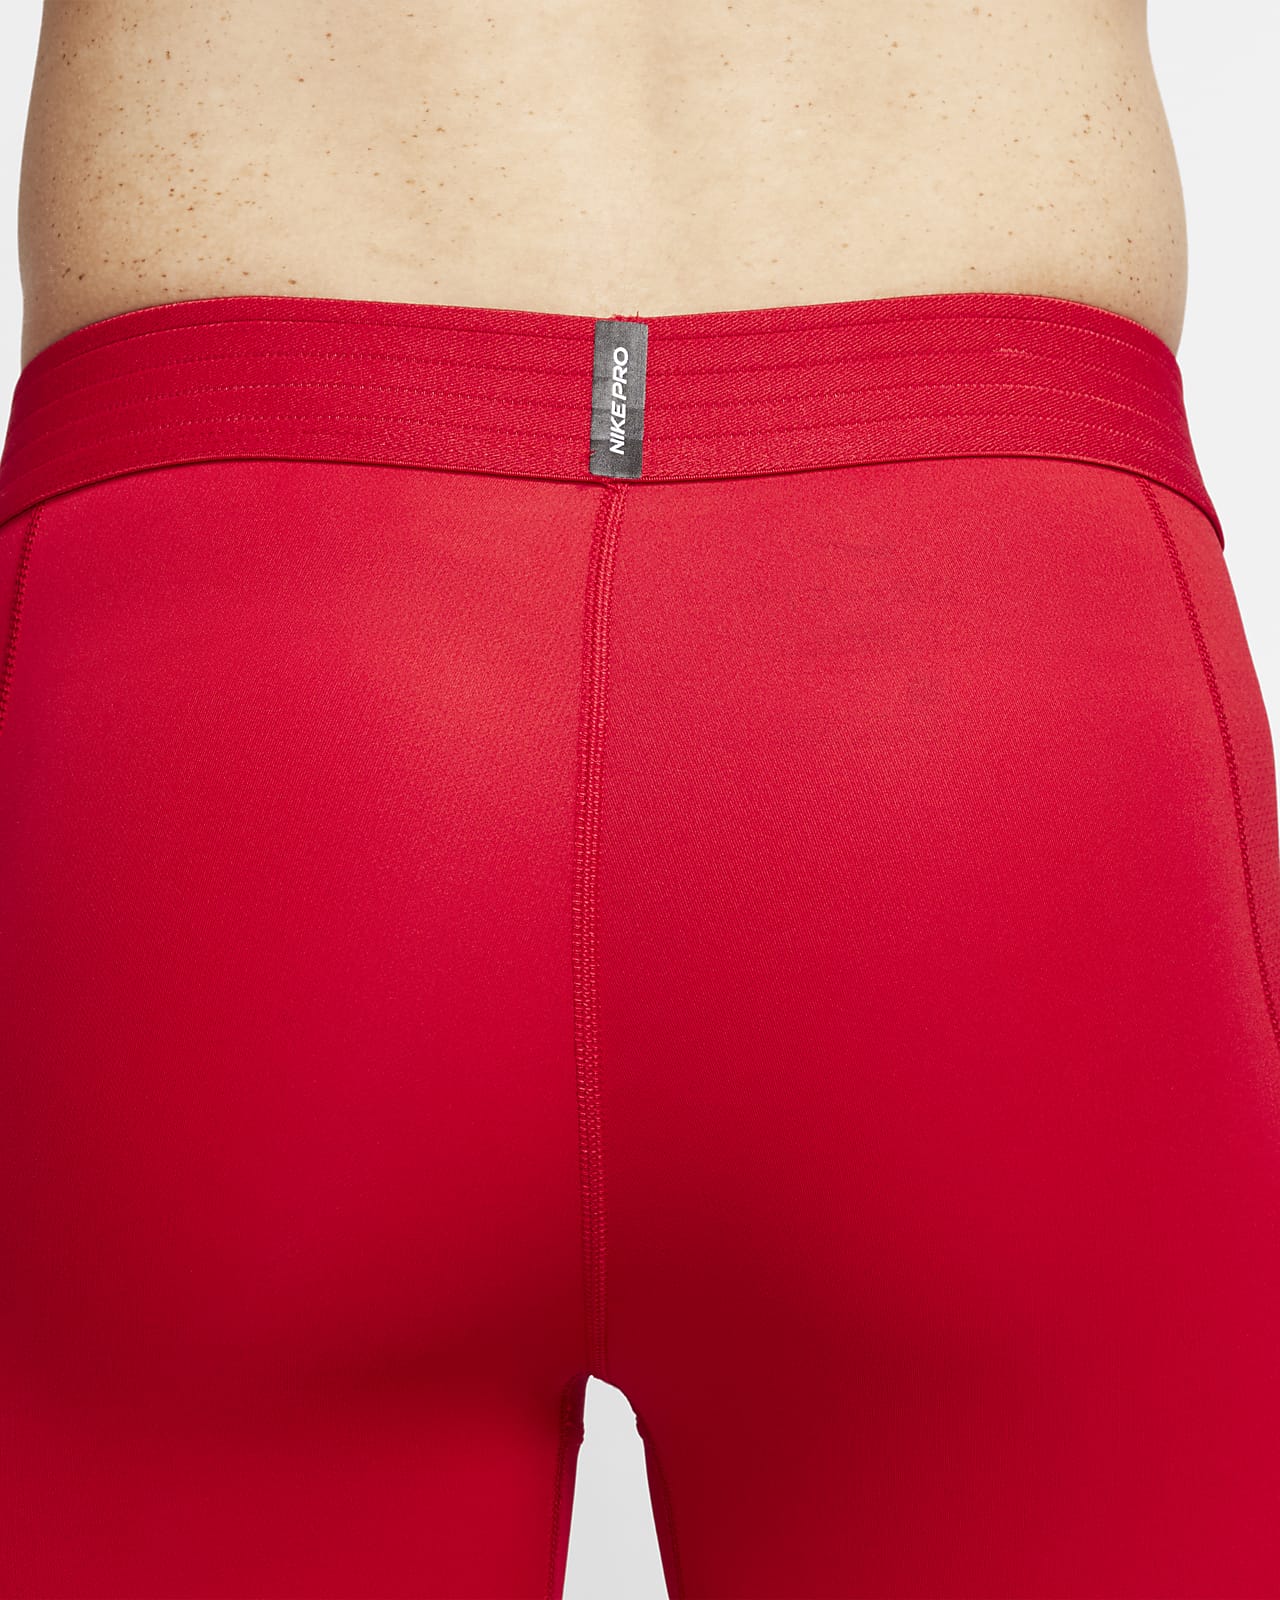 red nike compression shorts